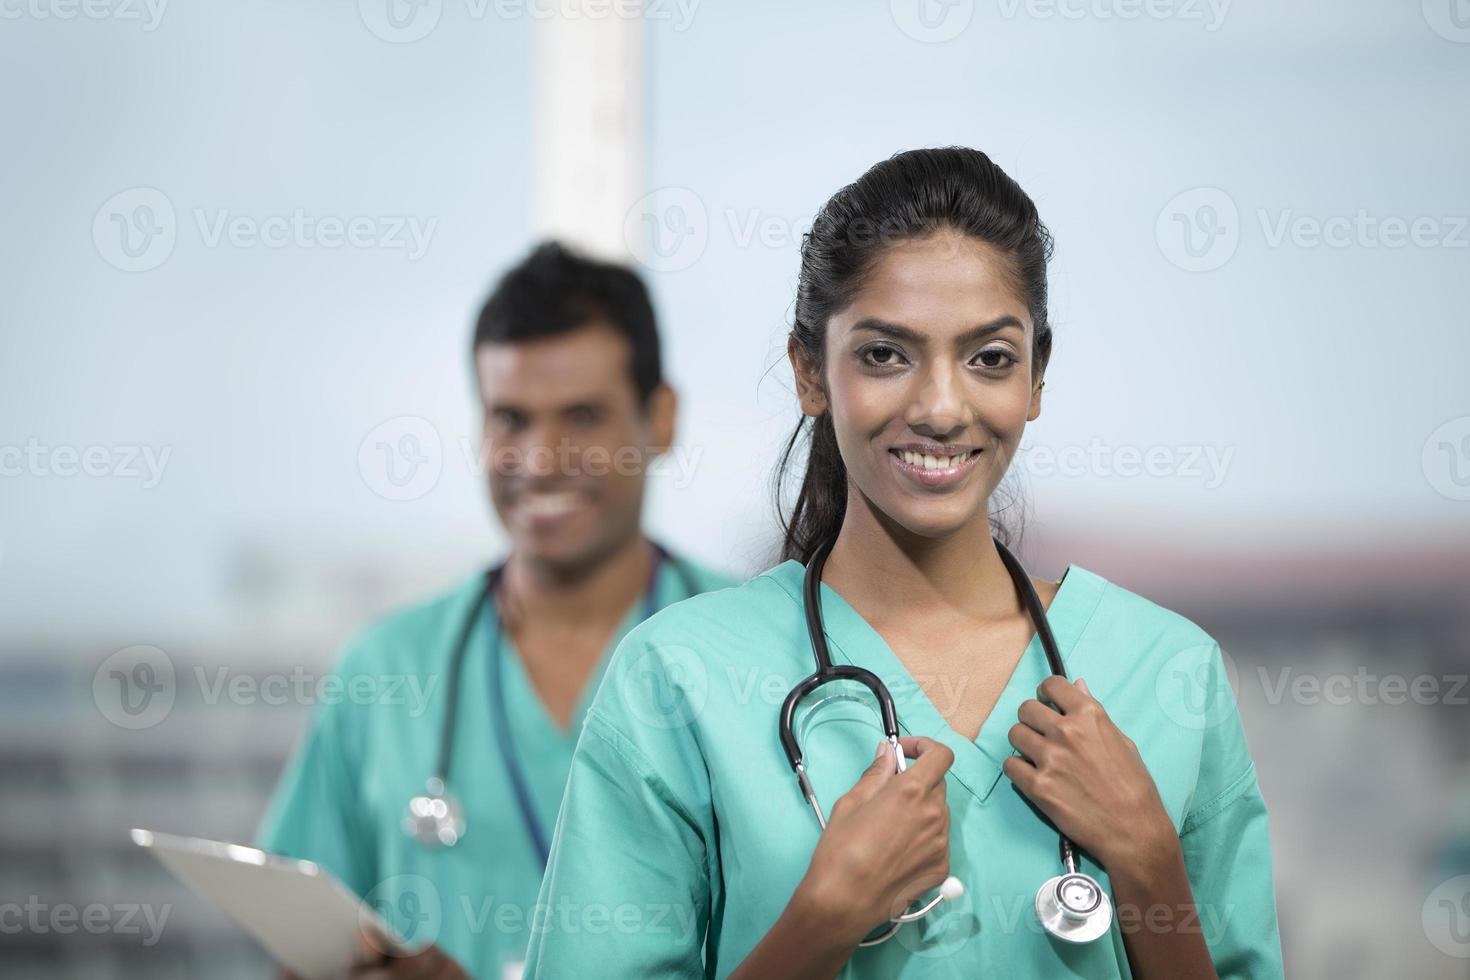 Female Indian doctor with her colleague photo